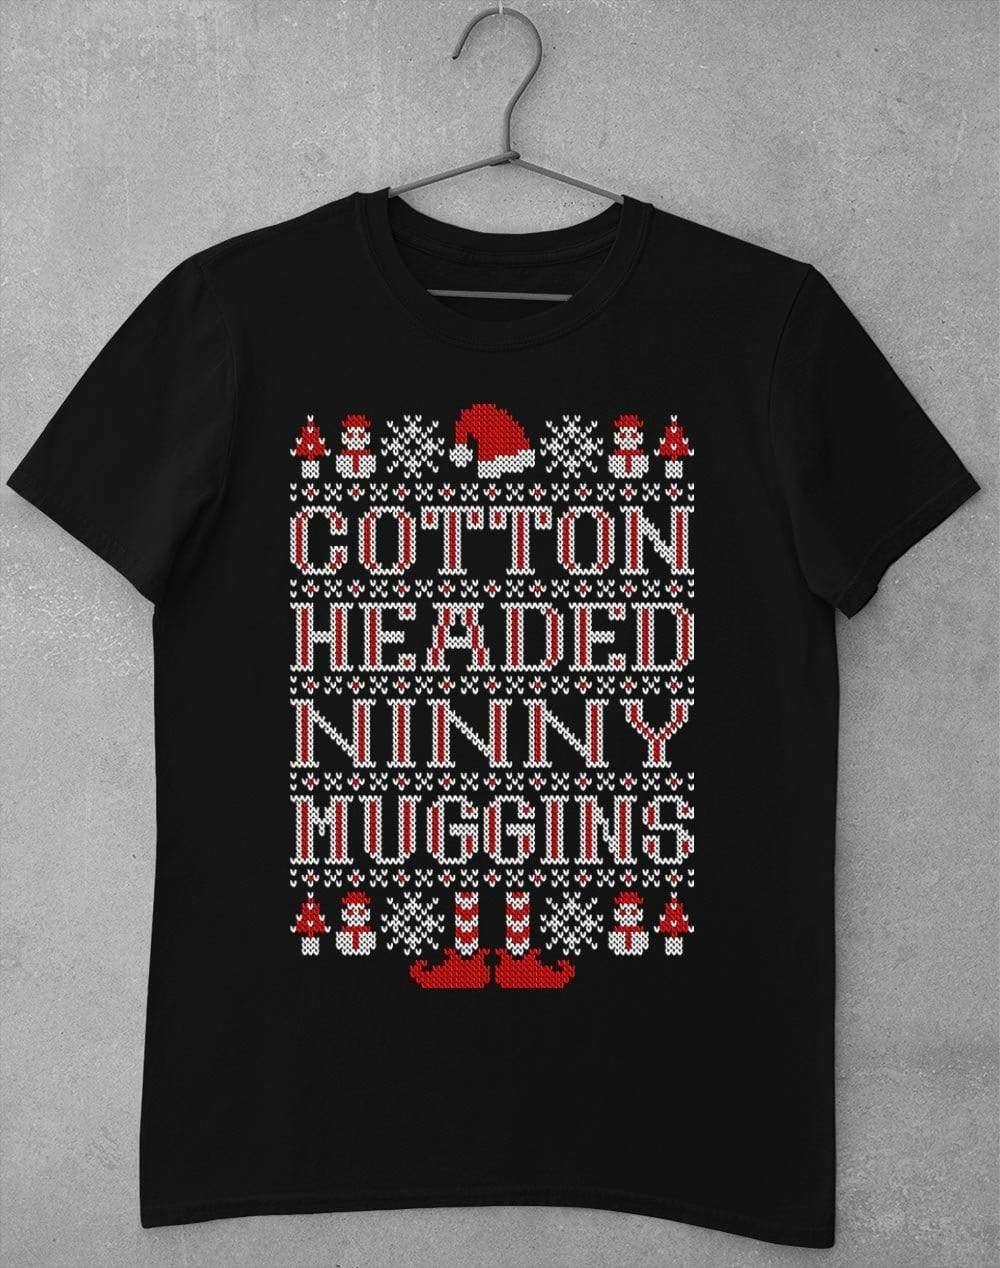 Cotton Headed Ninny Muggins Festive Knitted-Look T-Shirt S / Black  - Off World Tees